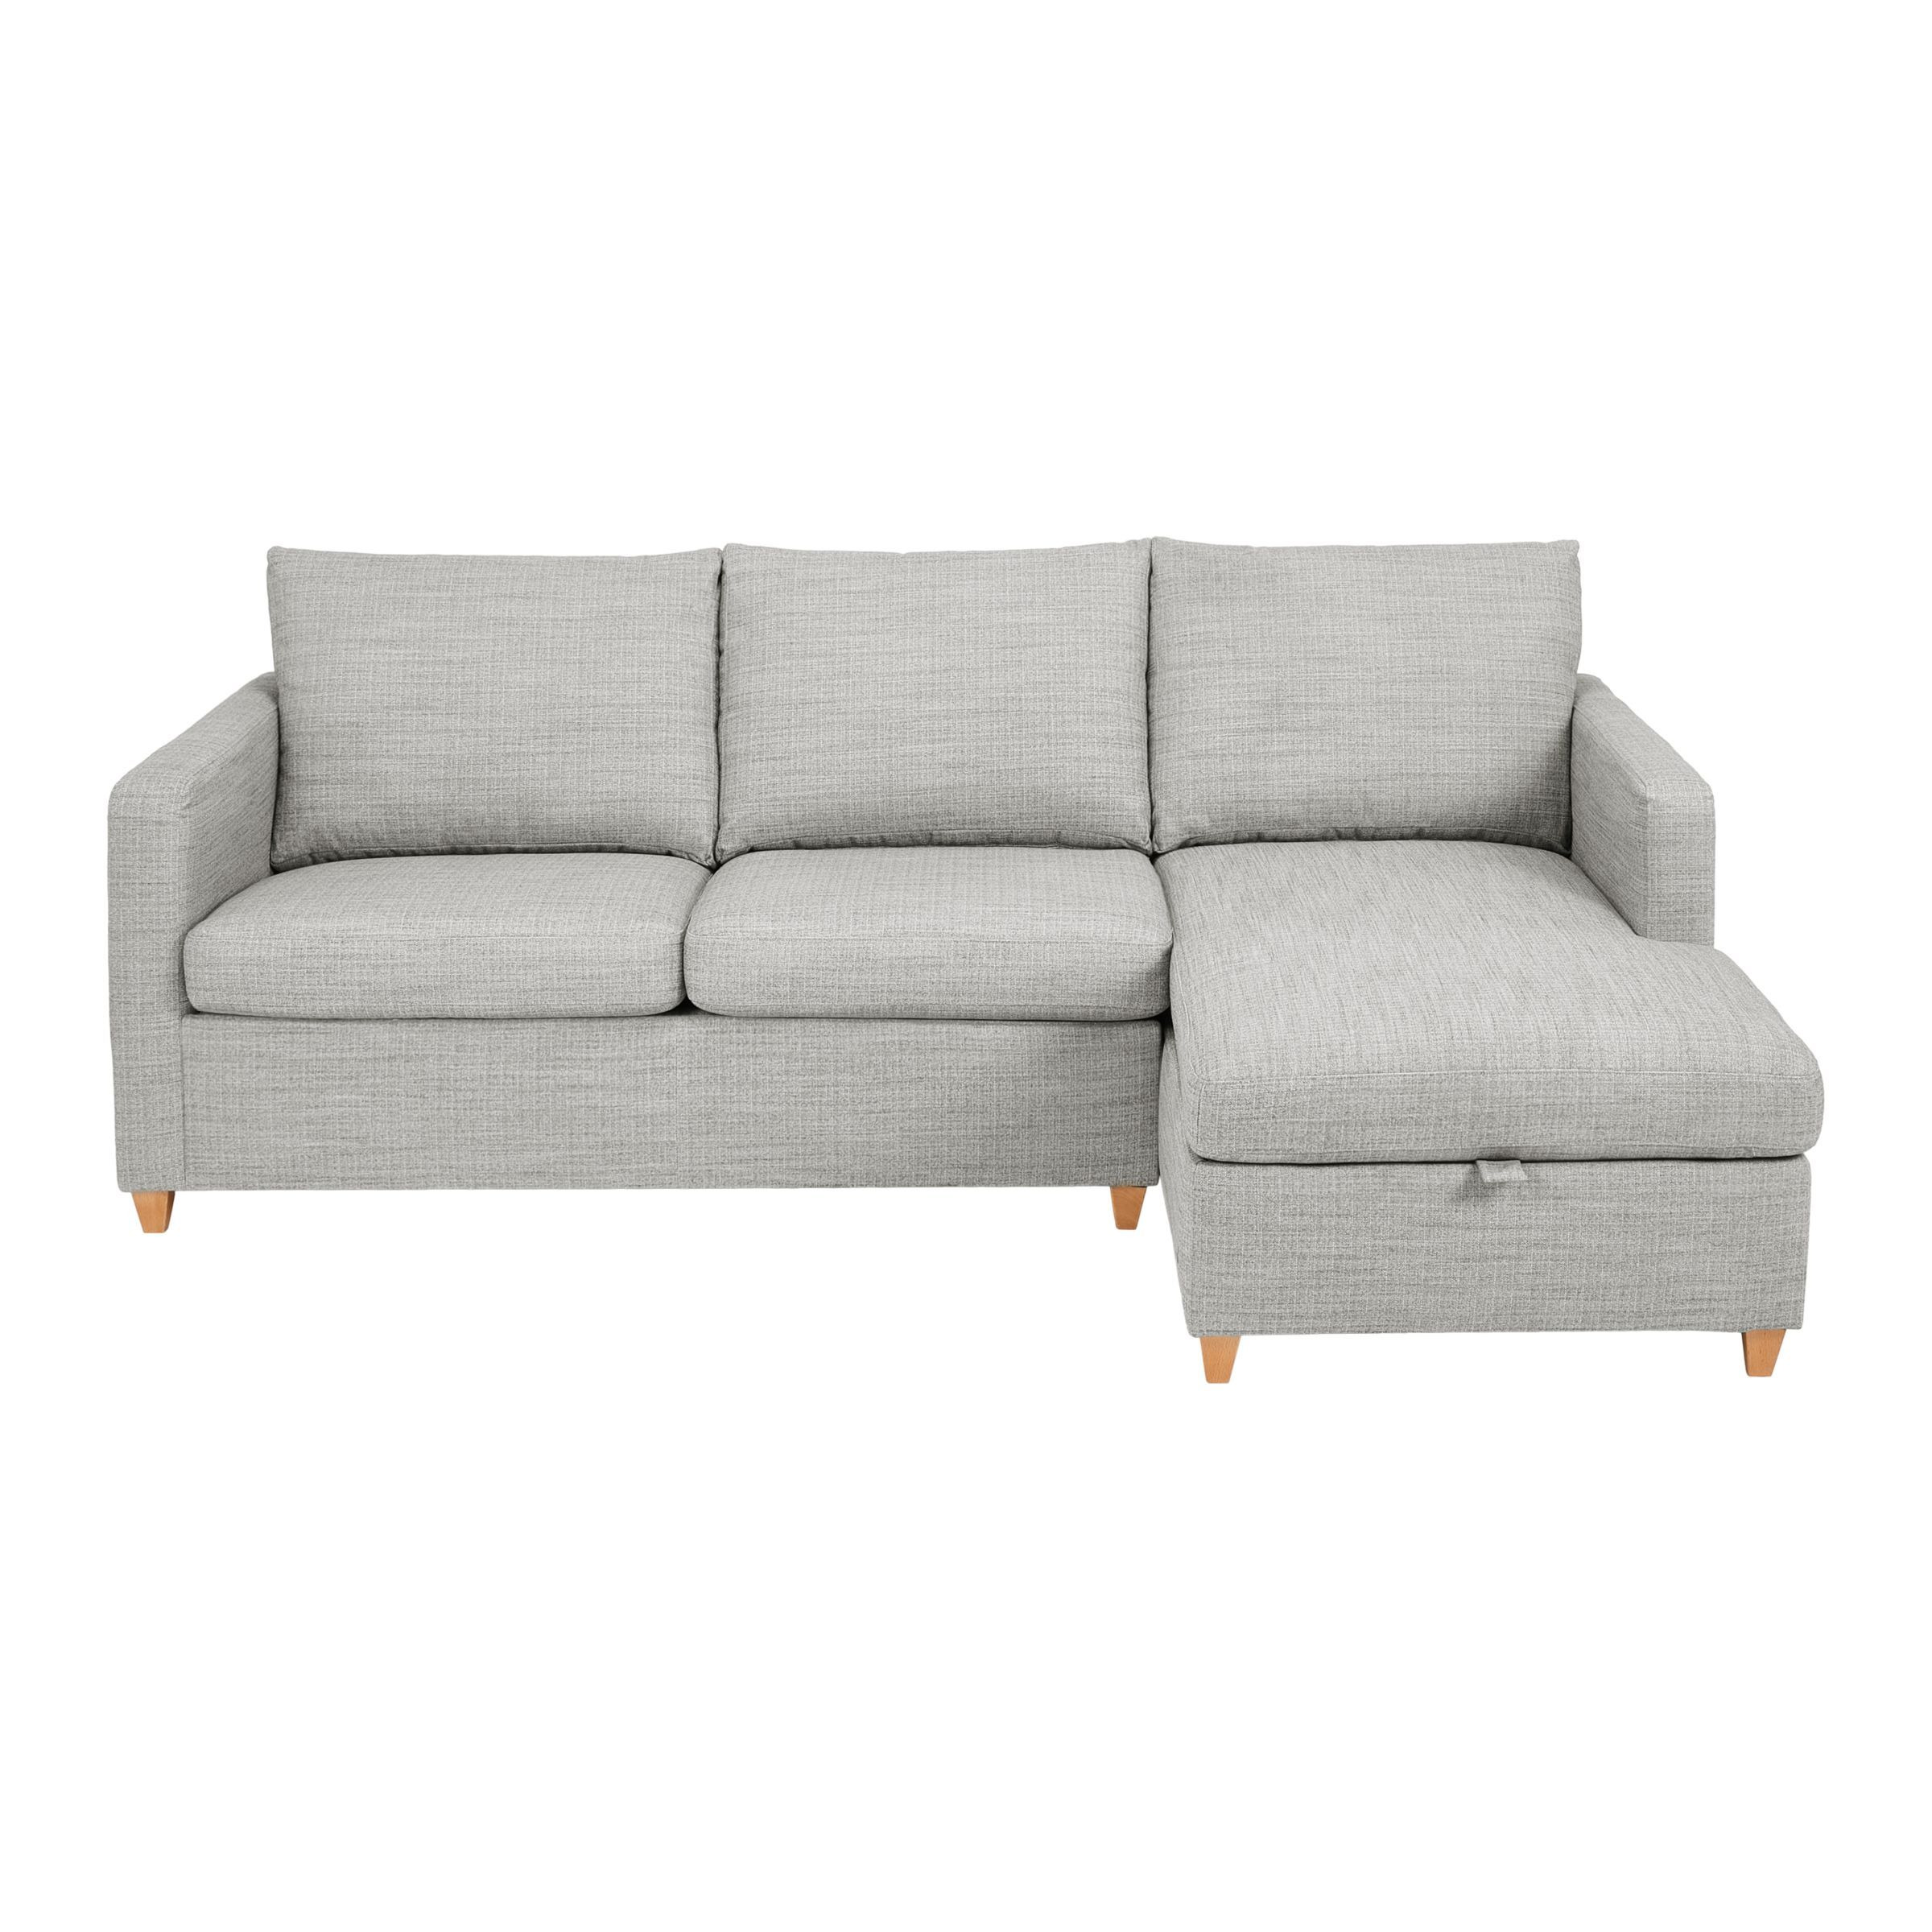 John Lewis Bailey 5+ Seater RHF Chaise End Sofa Bed - image 1